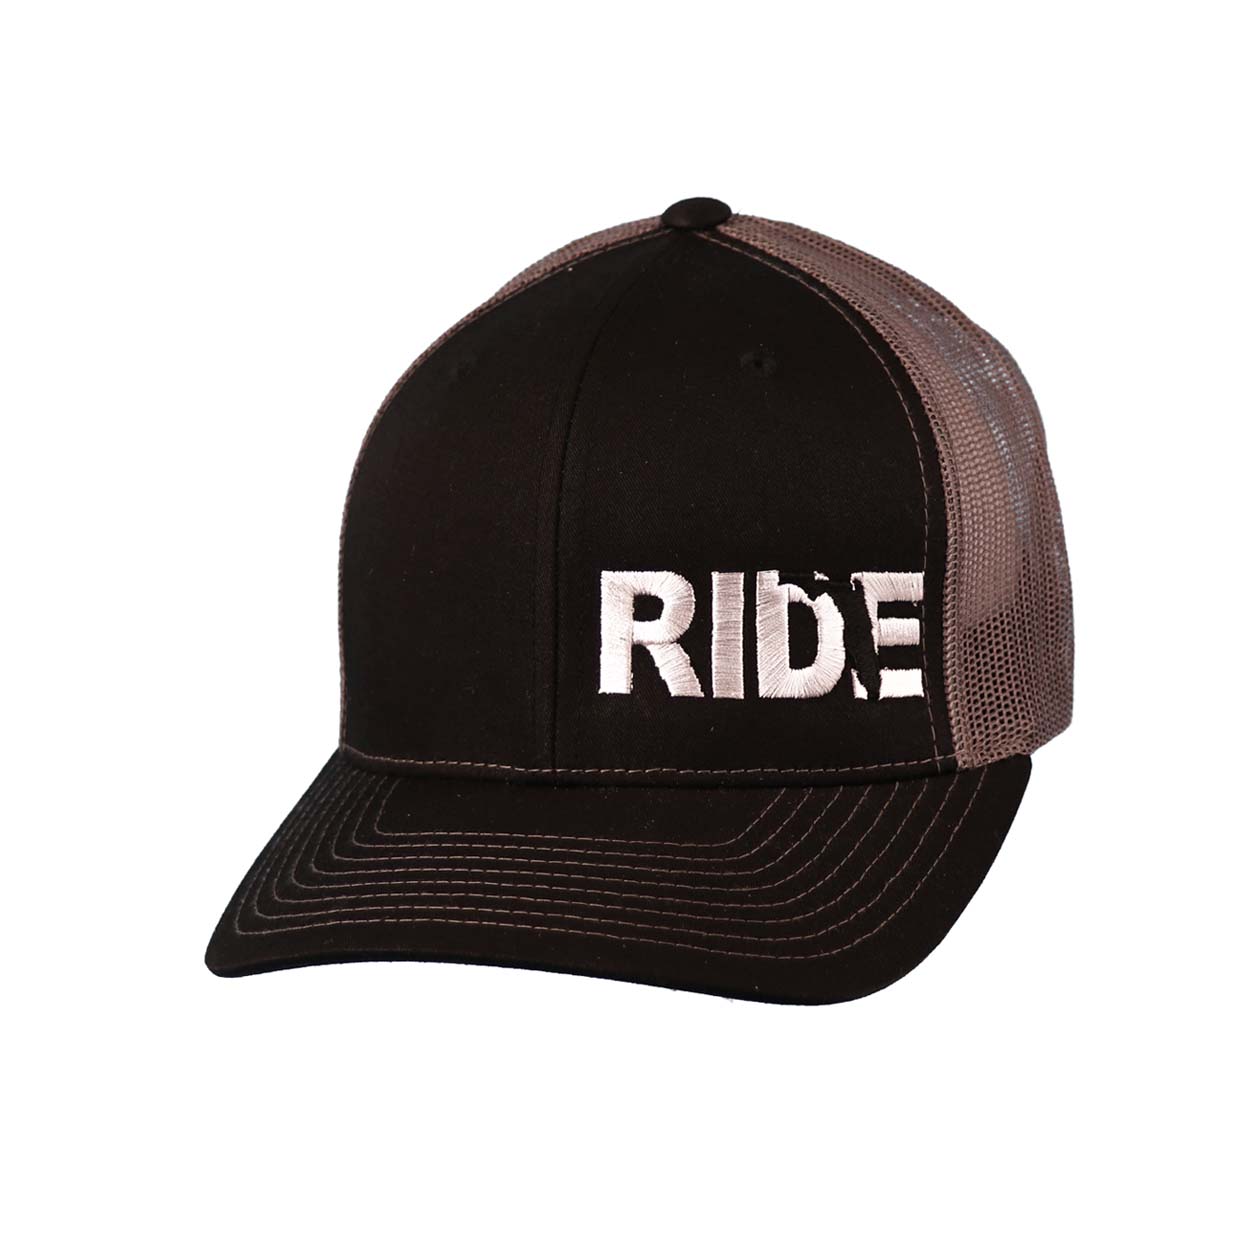 Ride Florida Night Out Embroidered Snapback Trucker Hat Black/Charcoal